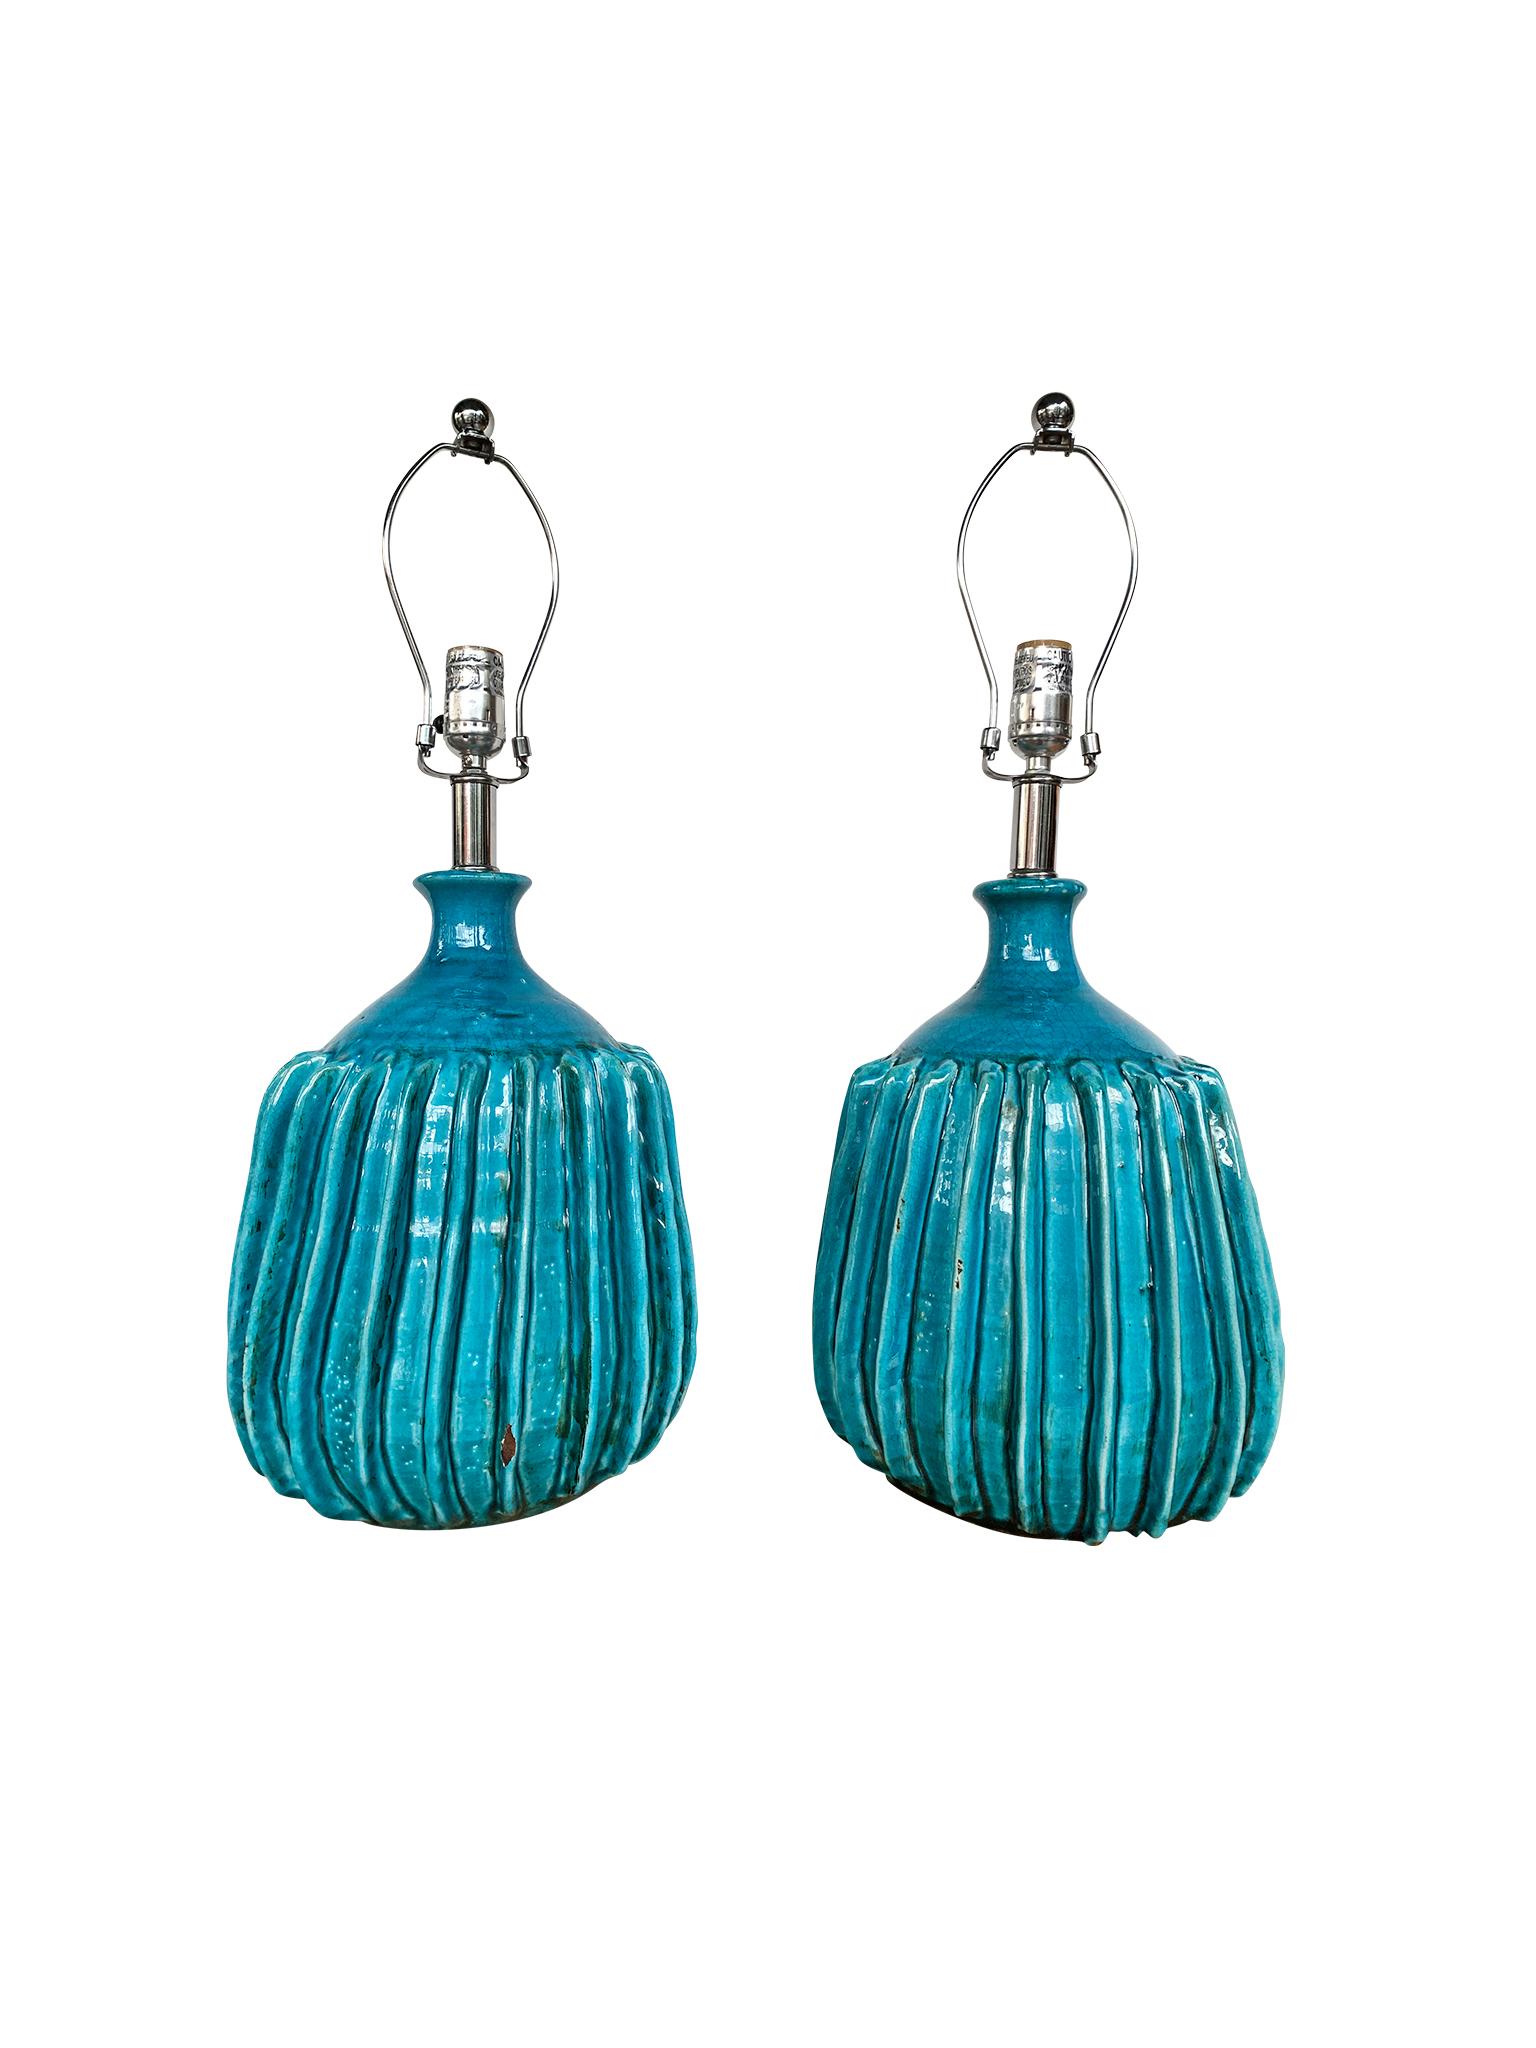 We love these spectacular table lamps! They will enrich your home not only with their lighting but also with their rich turquoise color, crackle glaze, and ridged texture. The lamps are ceramic with chrome hardware. They're paired with burlap